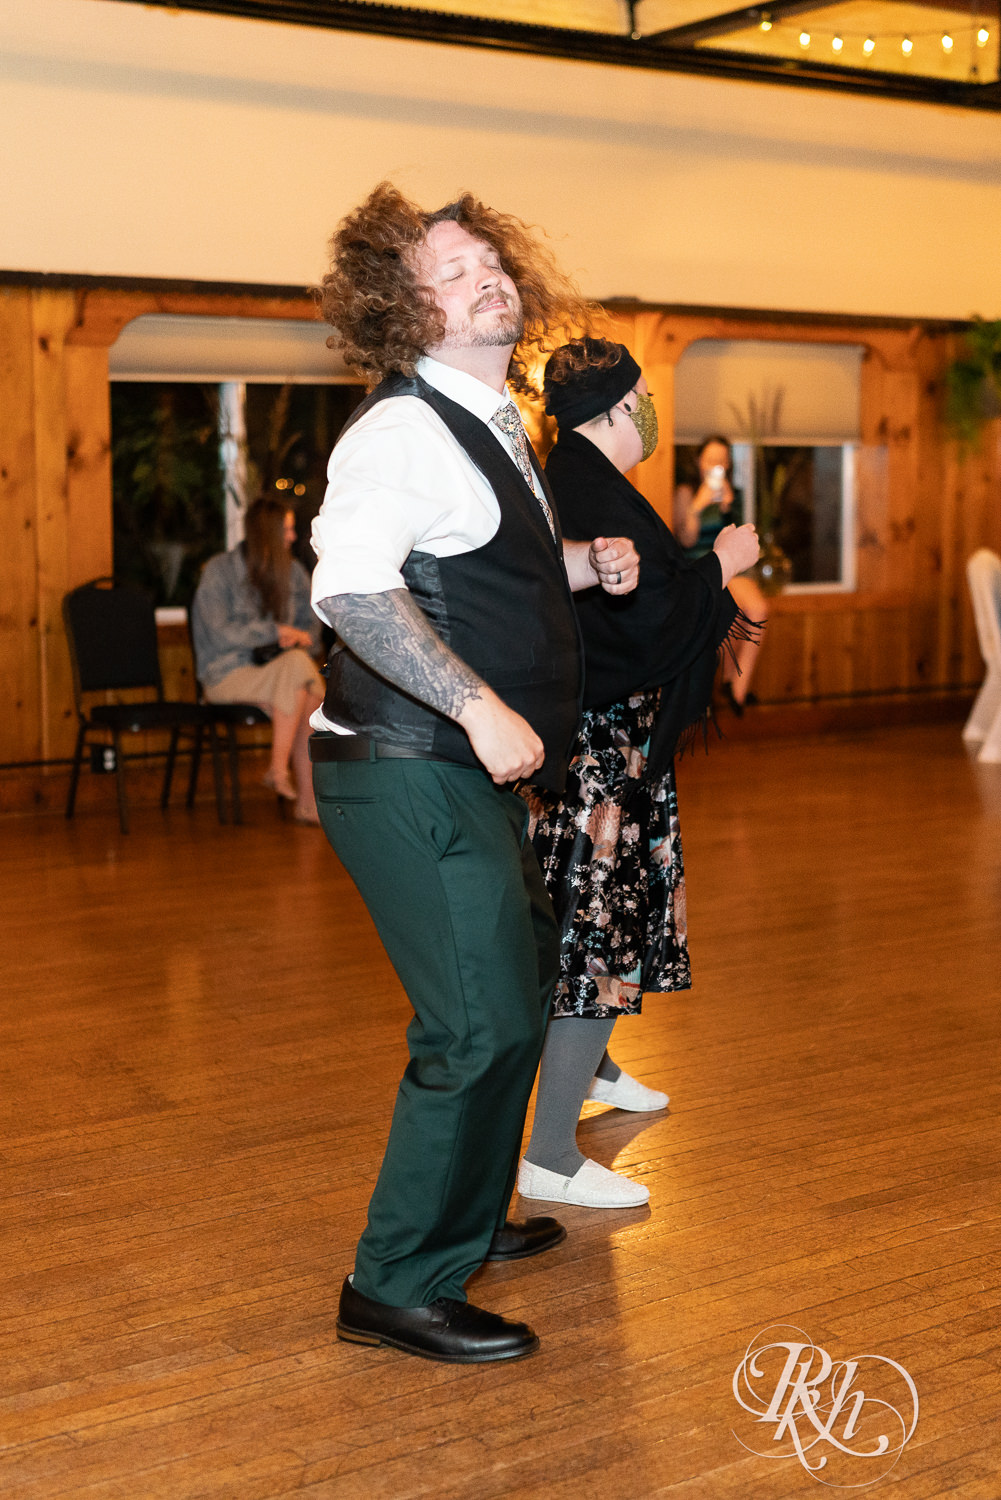 Groom and sister dance at wedding reception at Kellerman's Event Center in White Bear Lake, Minnesota.